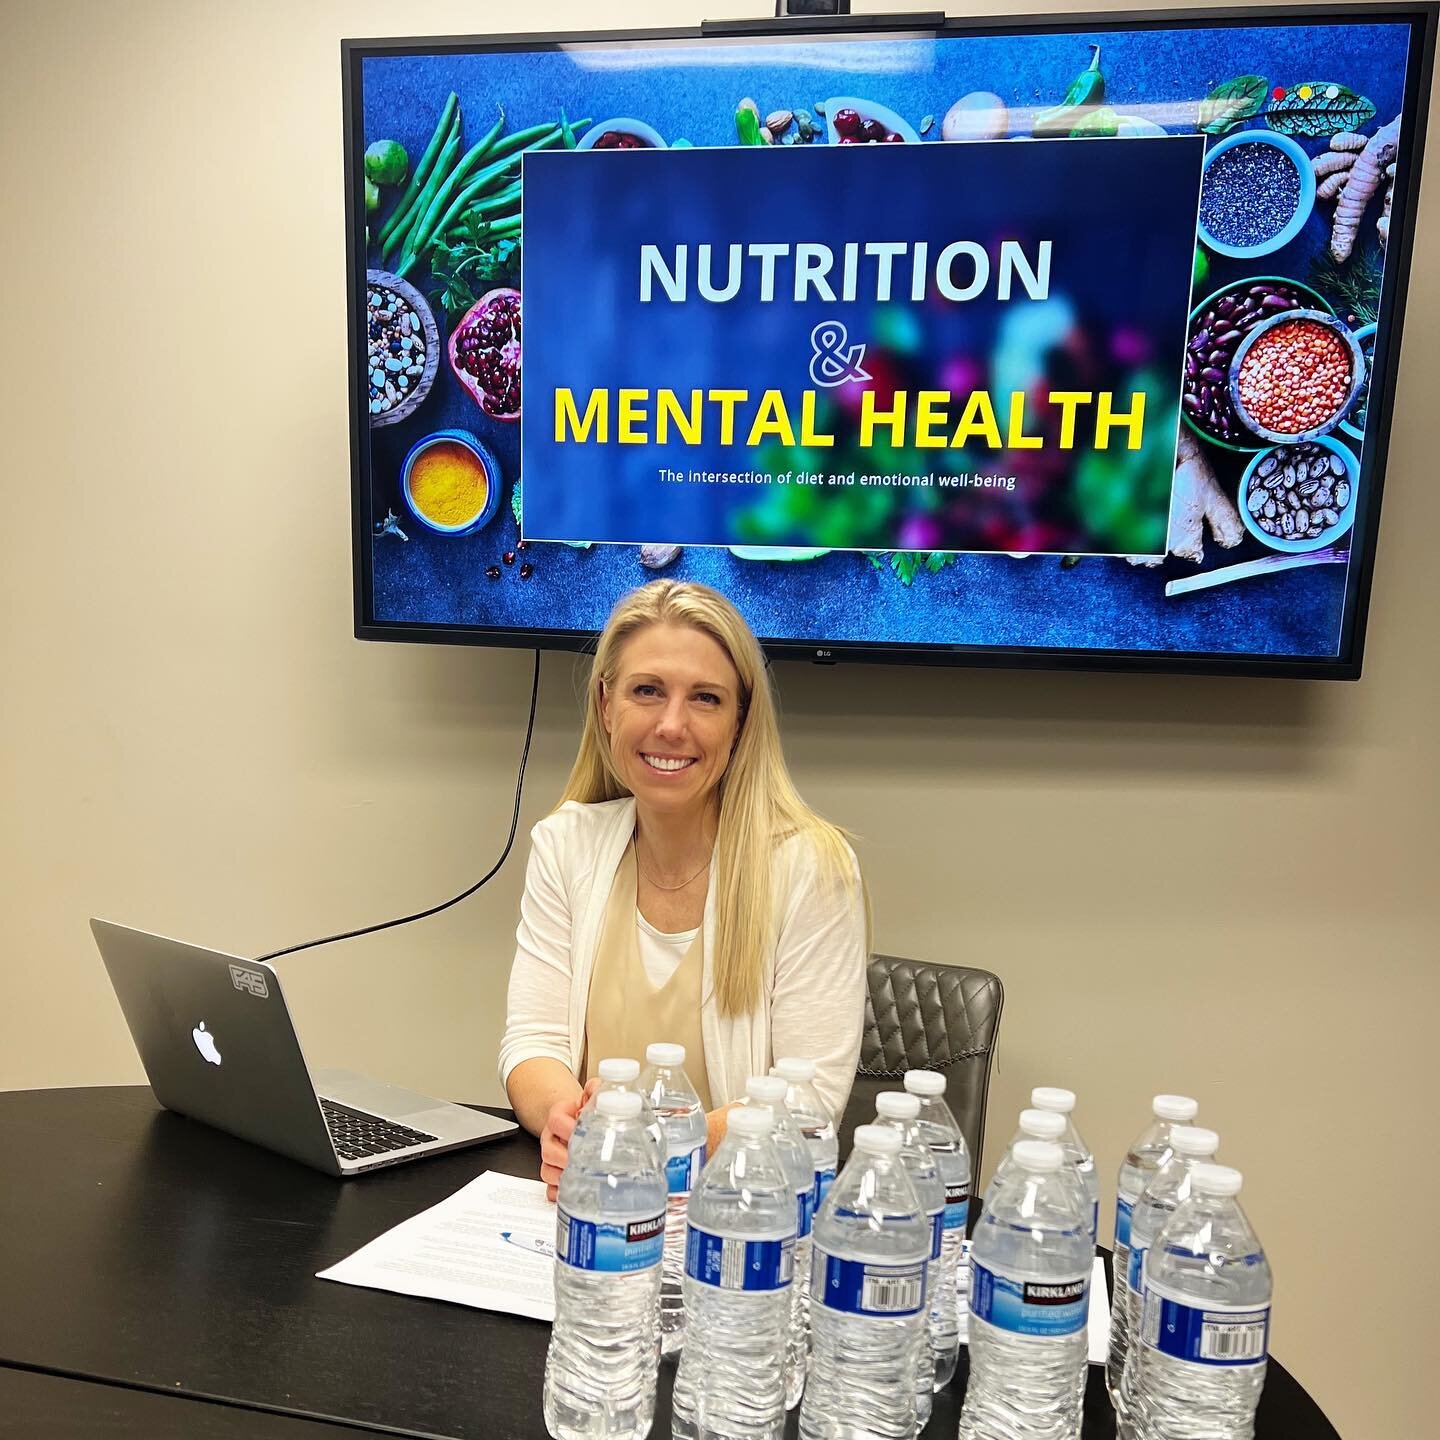 Last night we learned about nutrition and mental health from the very talented, very smart, very positive Kristen Nelson. 

We will definitely do it again because it was an hour packed with such good information. 

Remember to aim for 80% adherence a